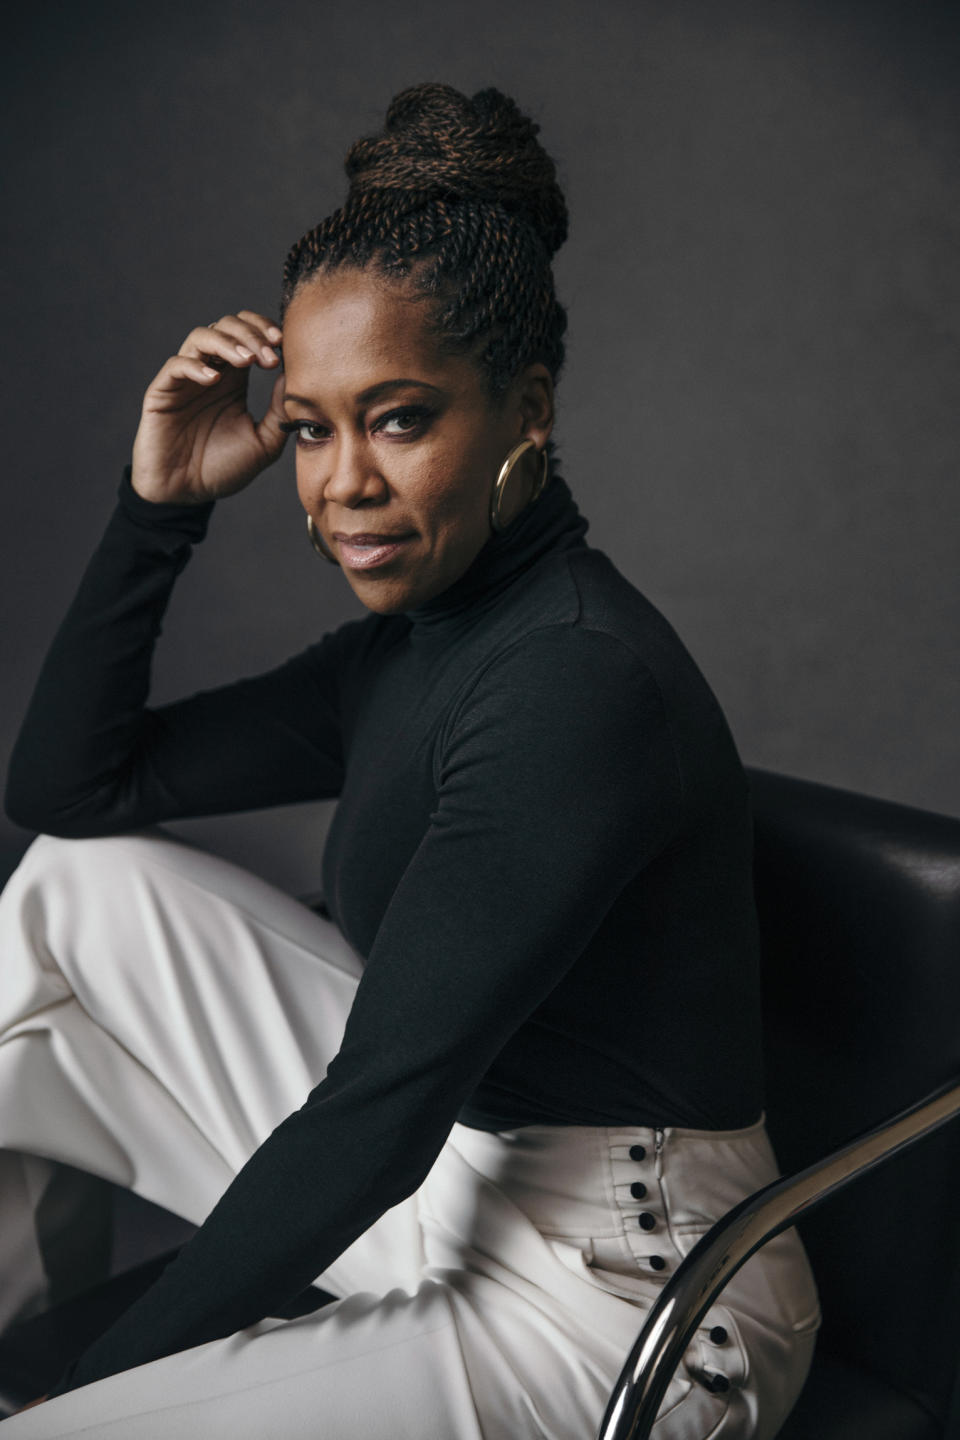 FILE - Regina King poses for a portrait at Sofitel in New York on Feb. 13, 2019. The Toronto International Film Festival on Thursday unveiled a lineup featuring King's directorial debut “One Night in Miami, a drama about a young Muhammad Ali, then Cassius Clay. The festival, which is set to run Sept. 10-19, has plotted a largely virtual 45th edition due to the pandemic. (Photo by Victoria Will/Invision/AP, File)